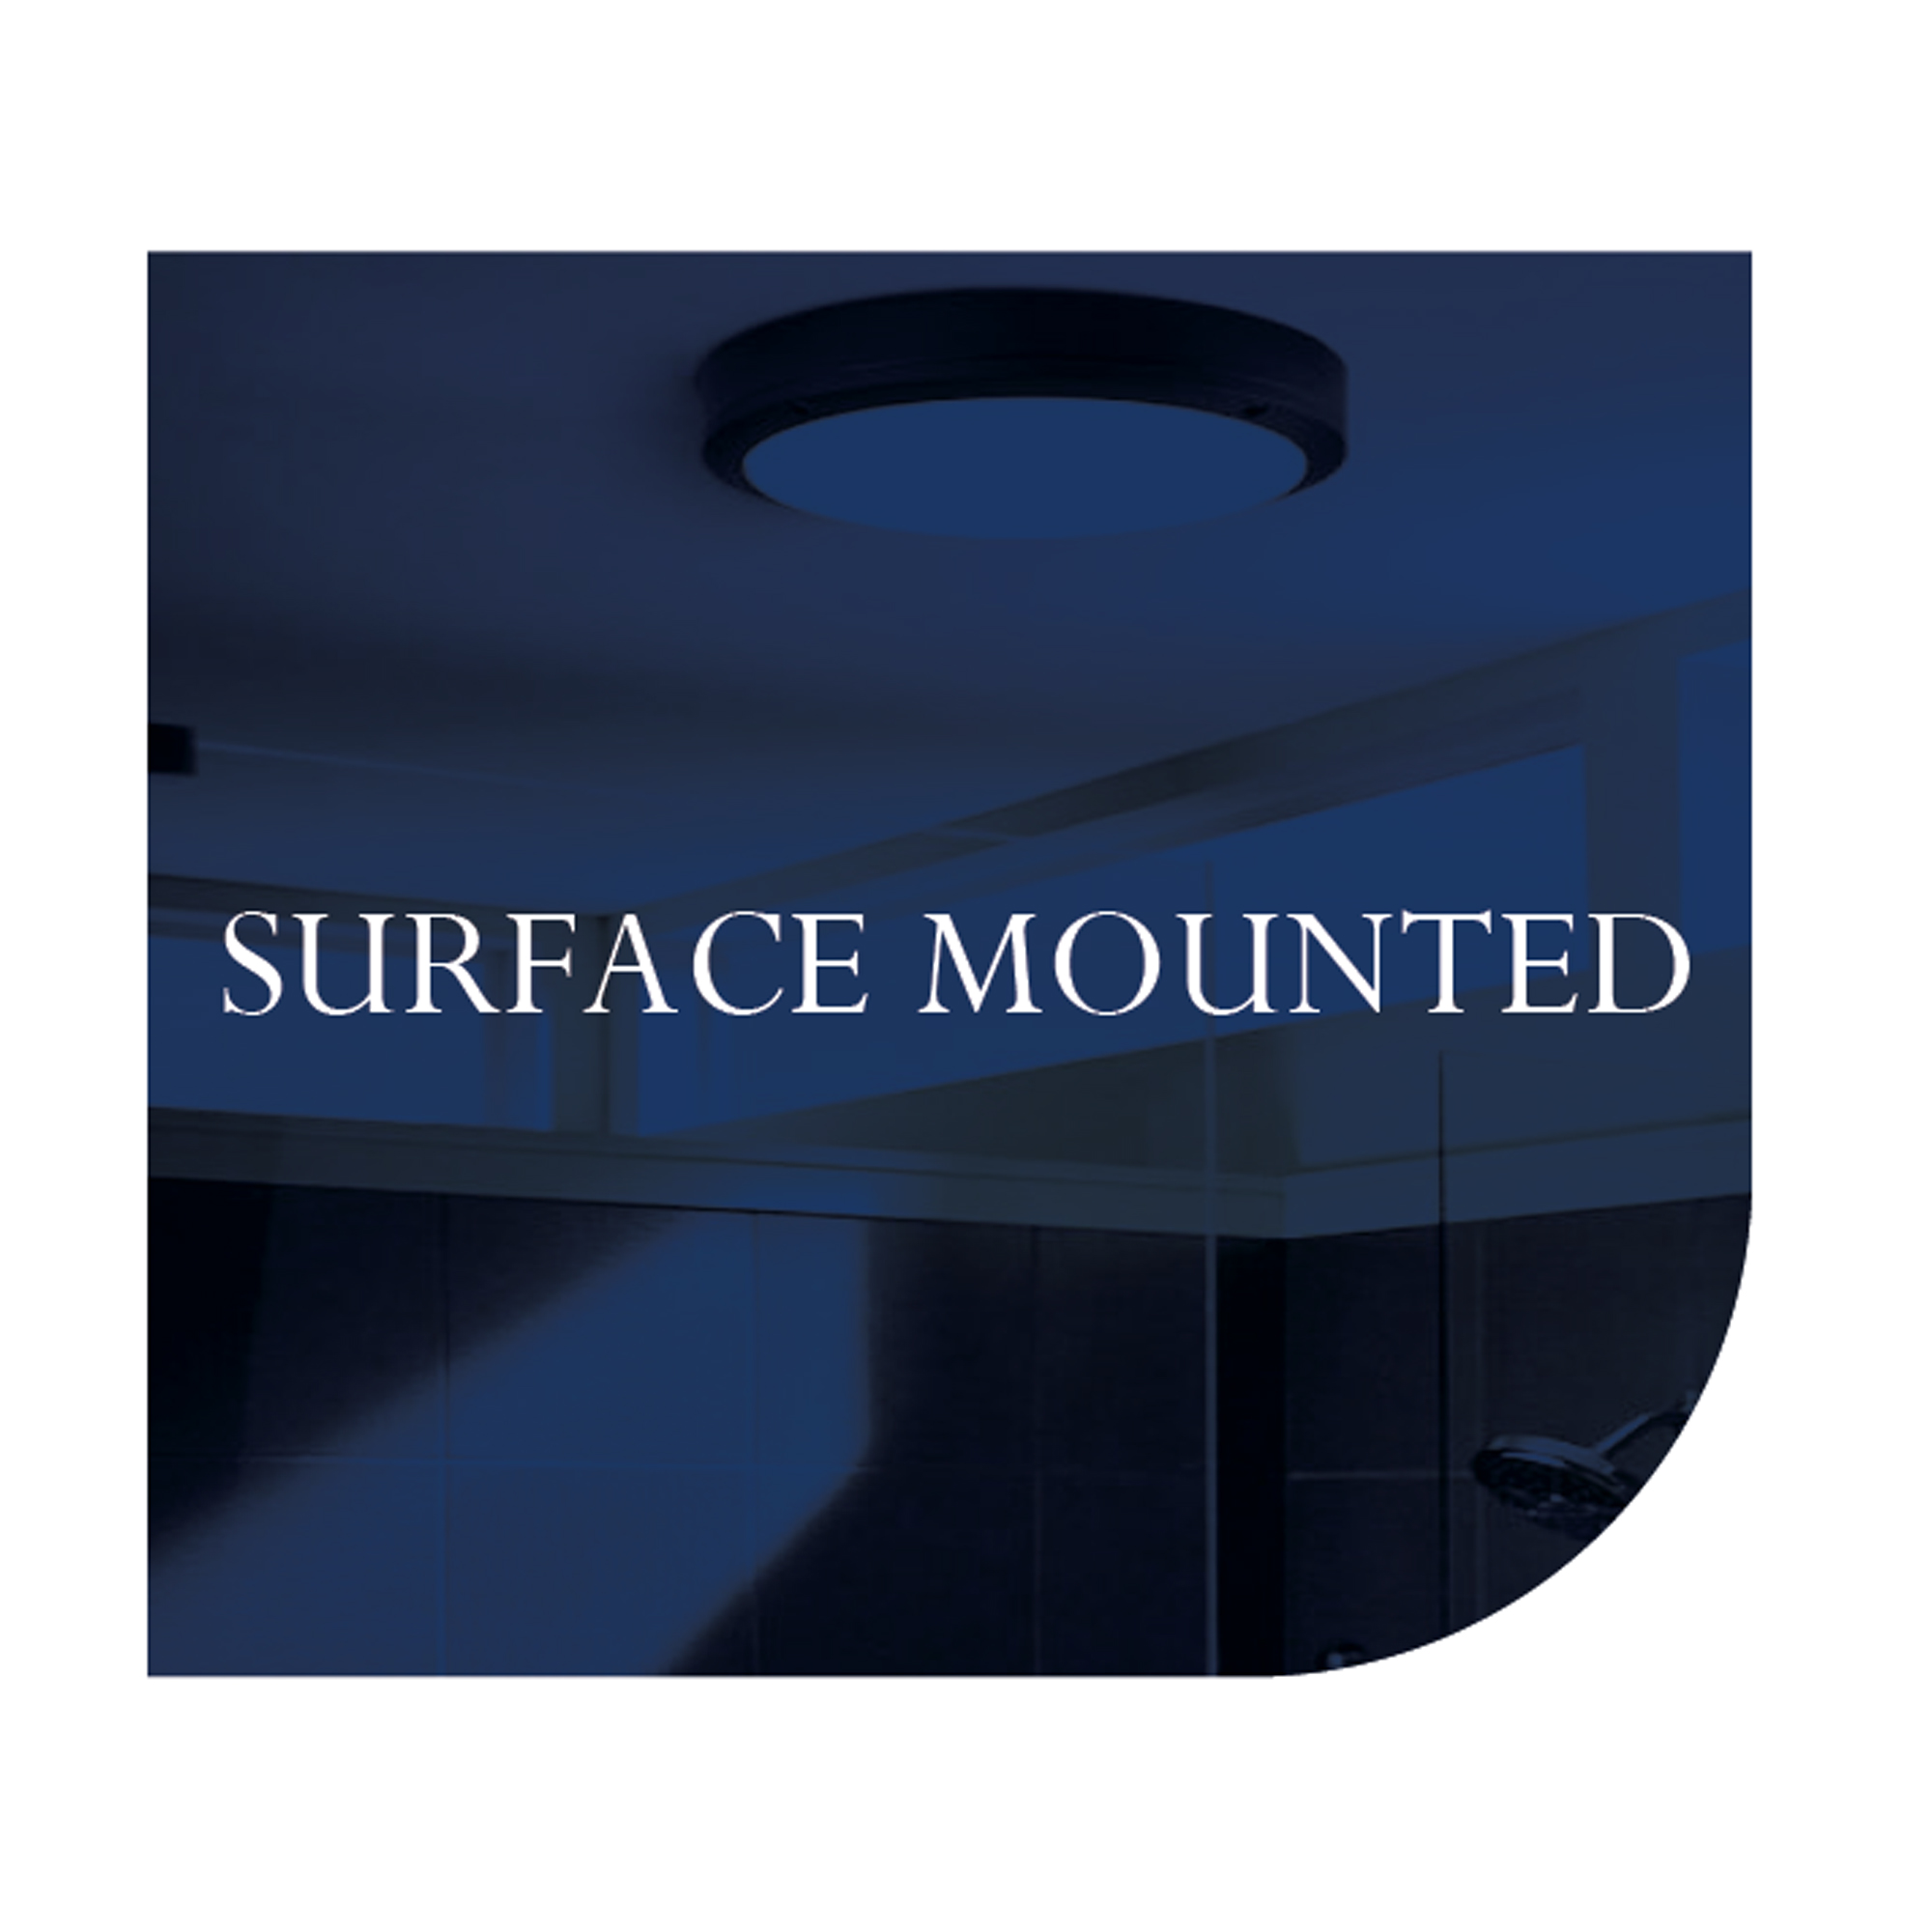 SURFACE MOUNTED